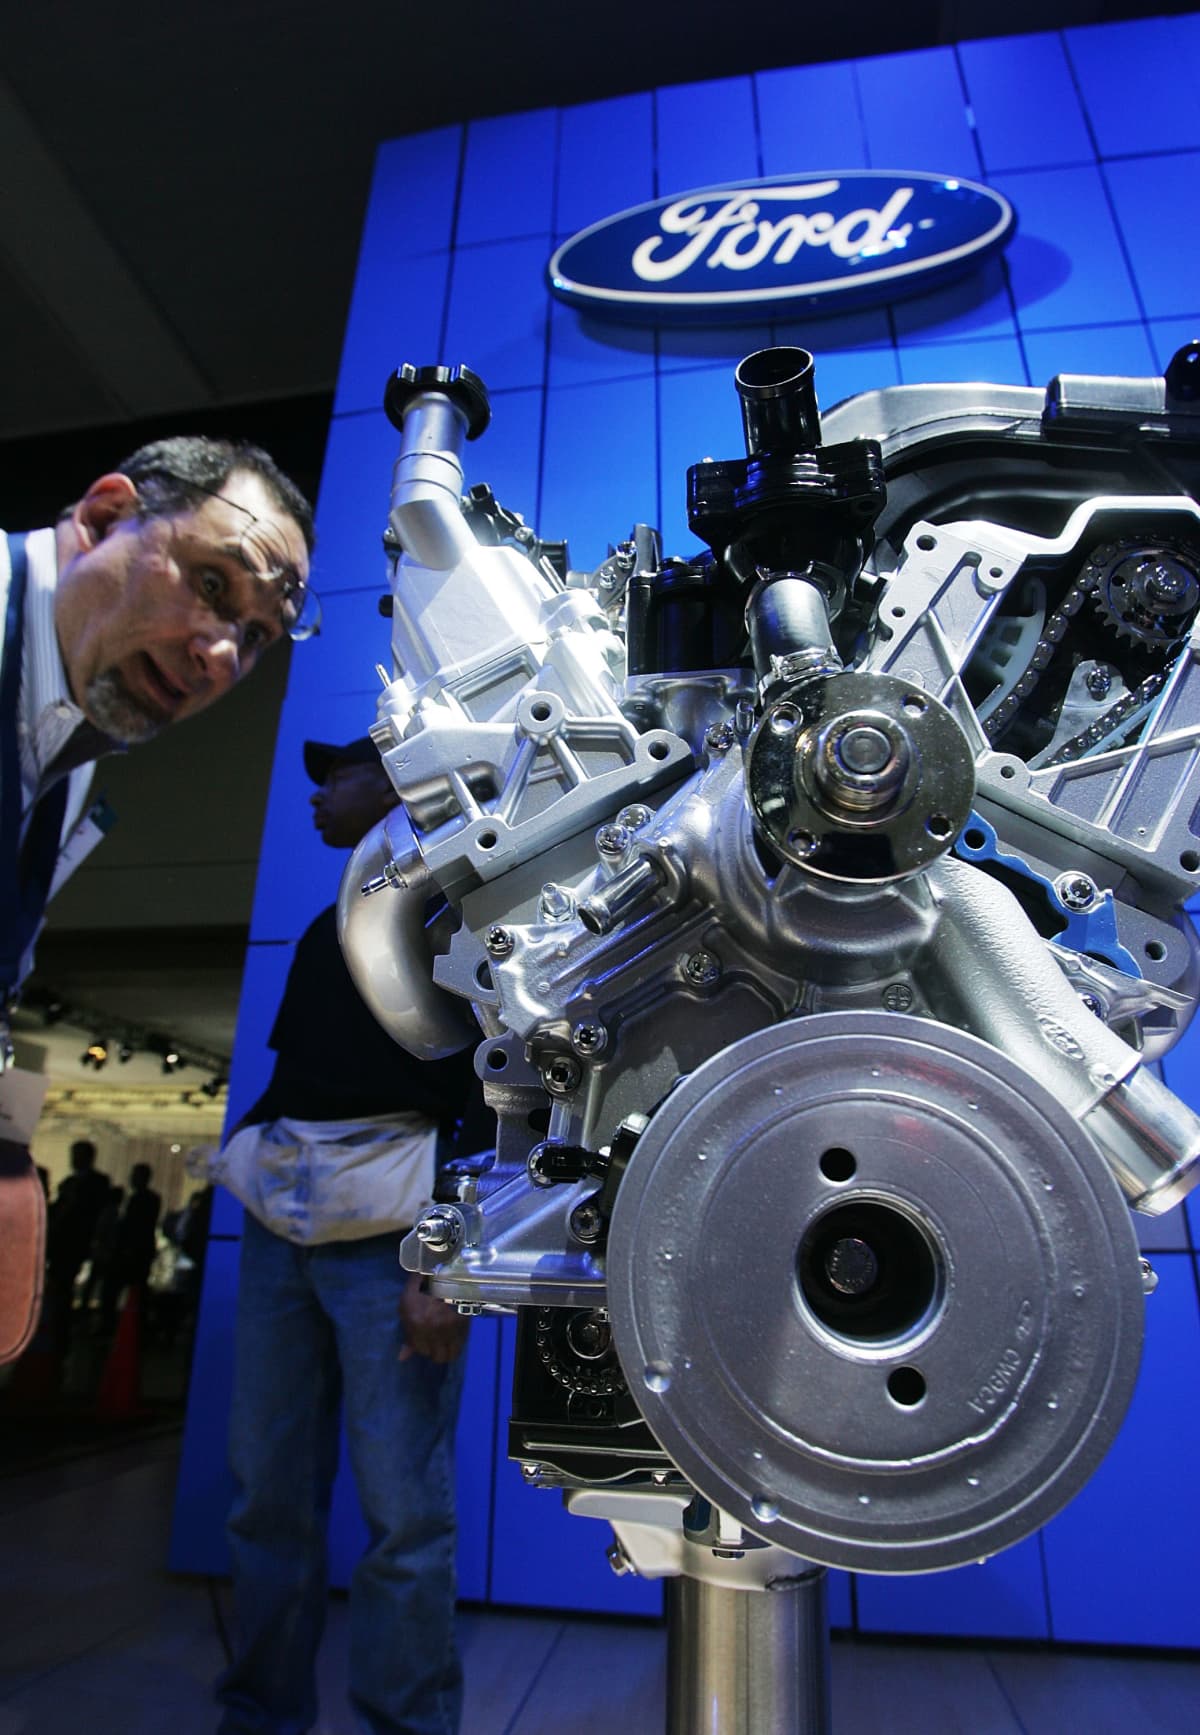 NEW YORK - APRIL 04:  A man looks at a Ford 4.0-liter SOHC V-6 engine at the New York International Auto Show April 4, 2007 in New York City. The show opens to the public April 6, 2007.  (Photo by Mario Tama/Getty Images)